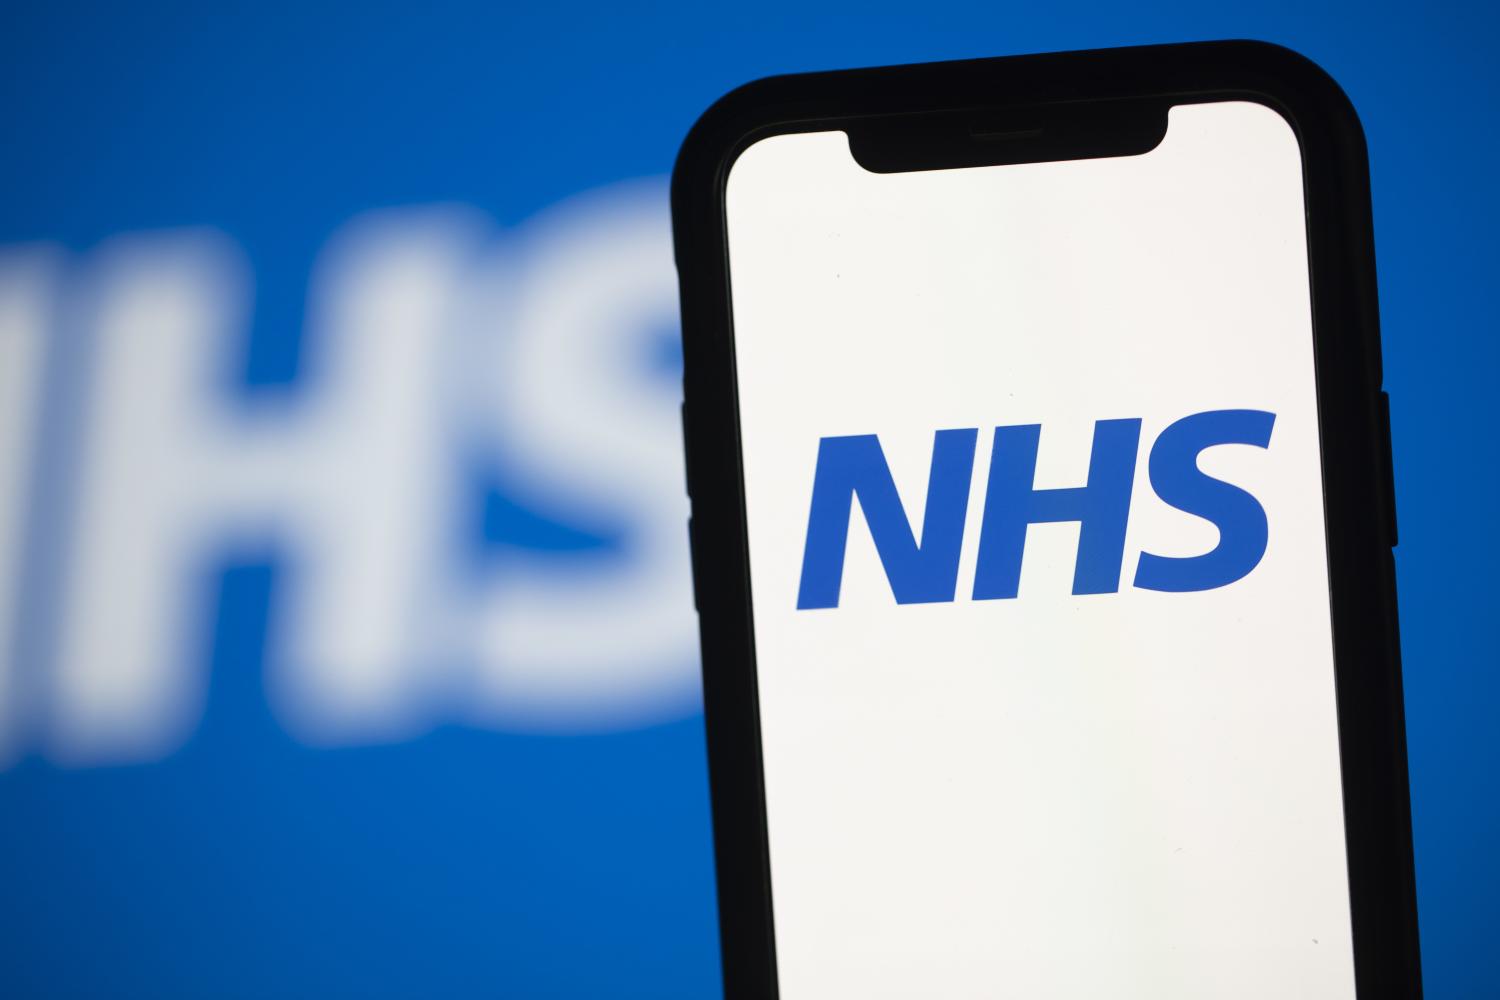 NHS logo displayed on a mobile phone screen